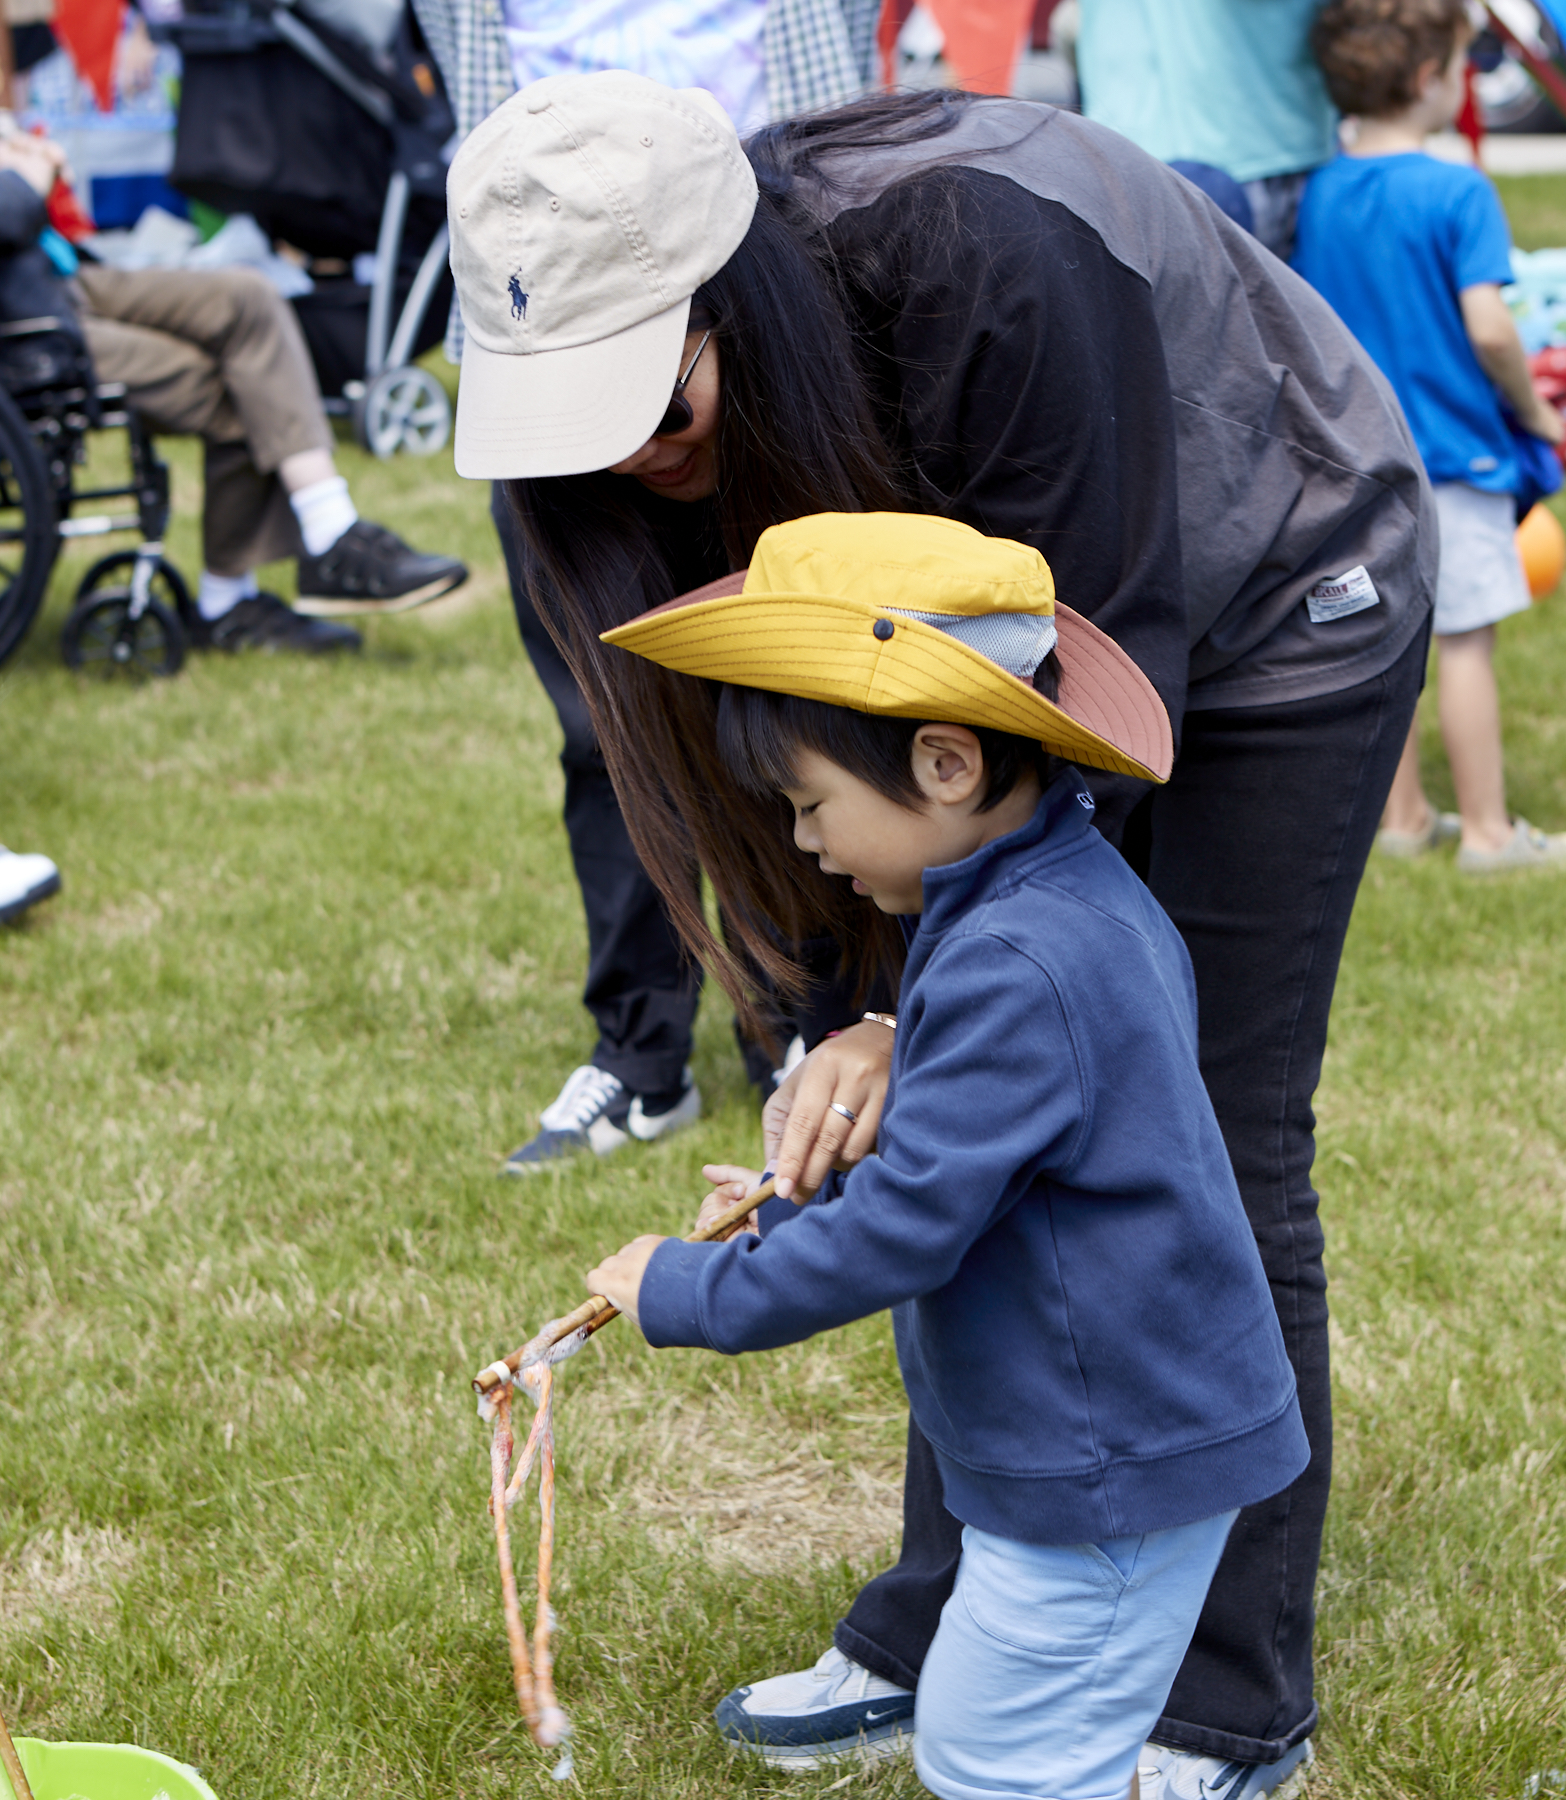 Woman in baseball hat assisting young boy wearing a sunhat with giant bubbles